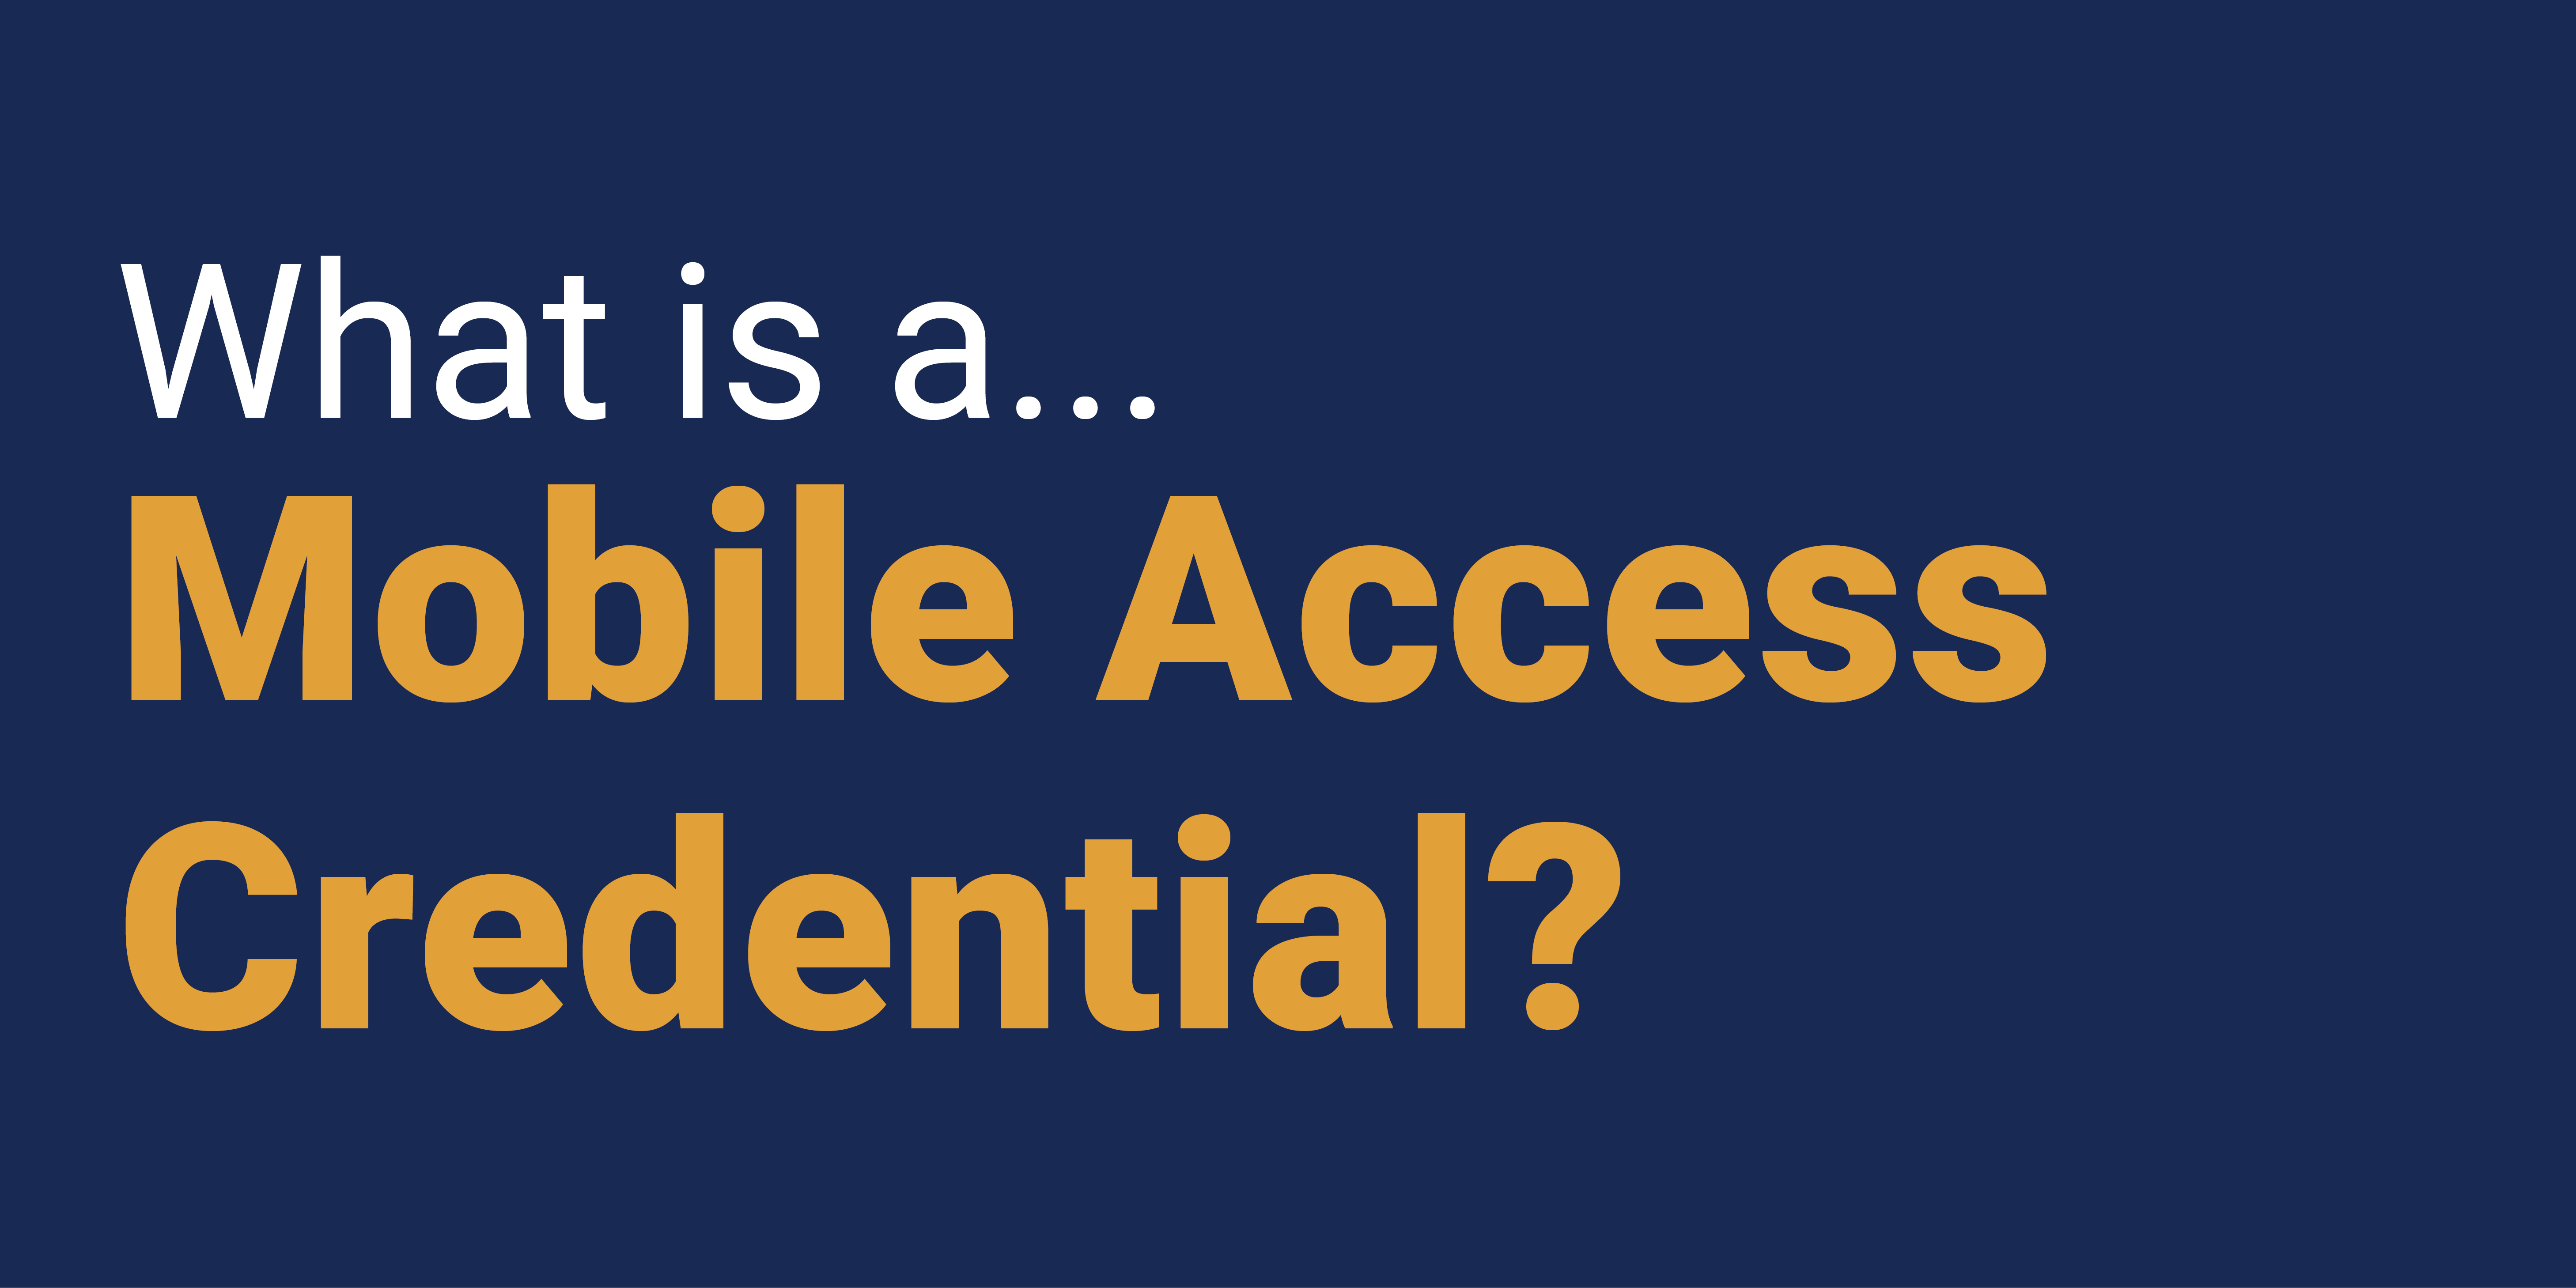 What is a Mobile Access Credential?